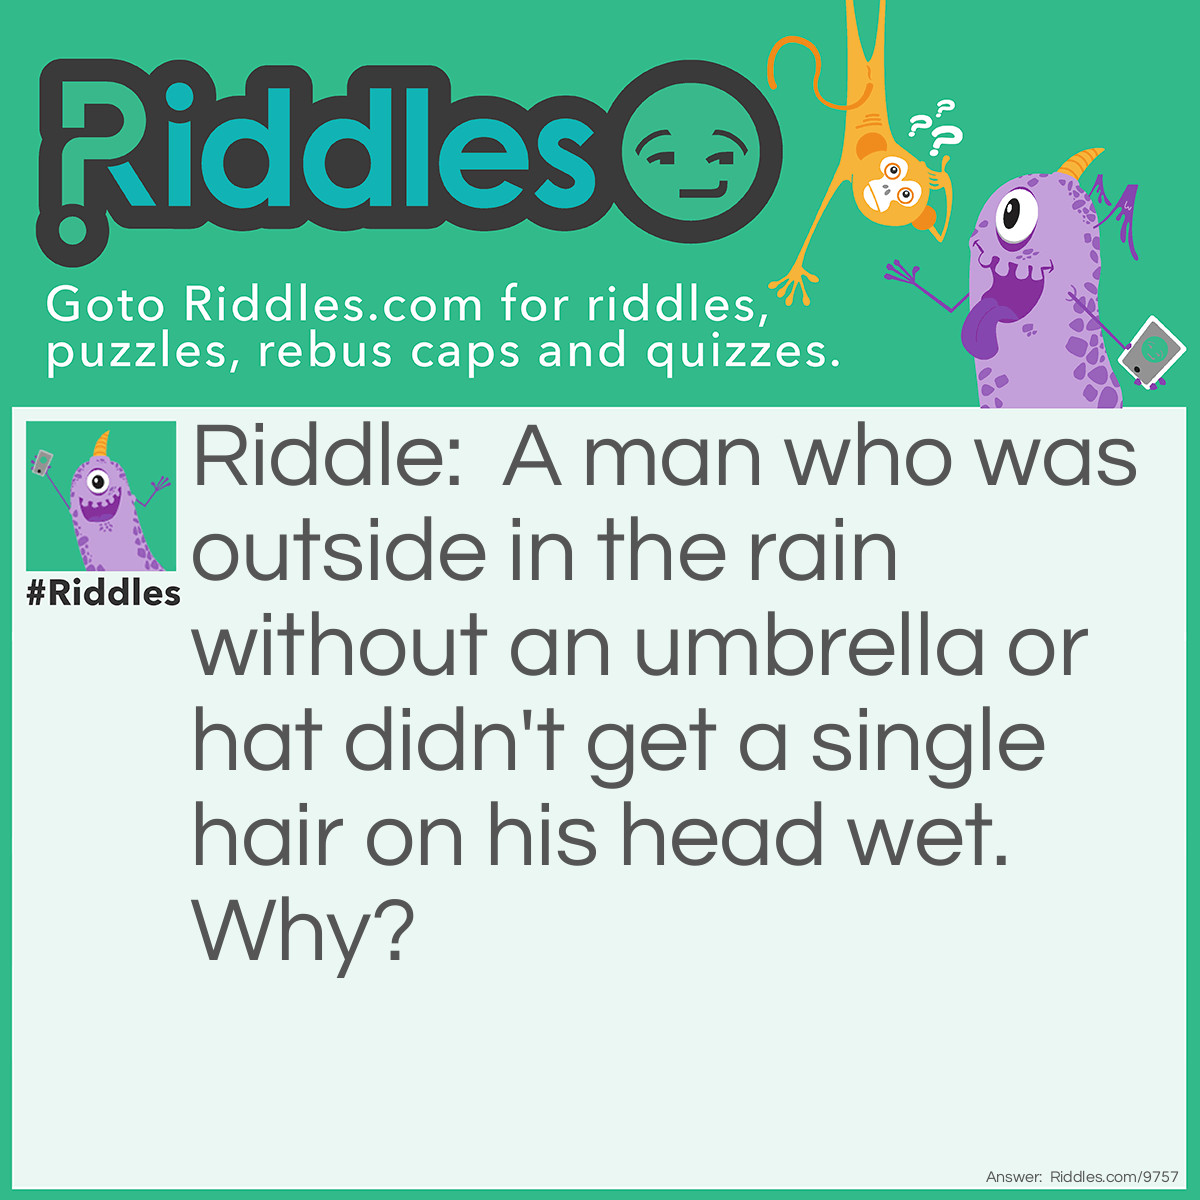 Riddle: A man who was outside in the rain without an umbrella or hat didn't get a single hair on his head wet. Why? Answer: He was bald.